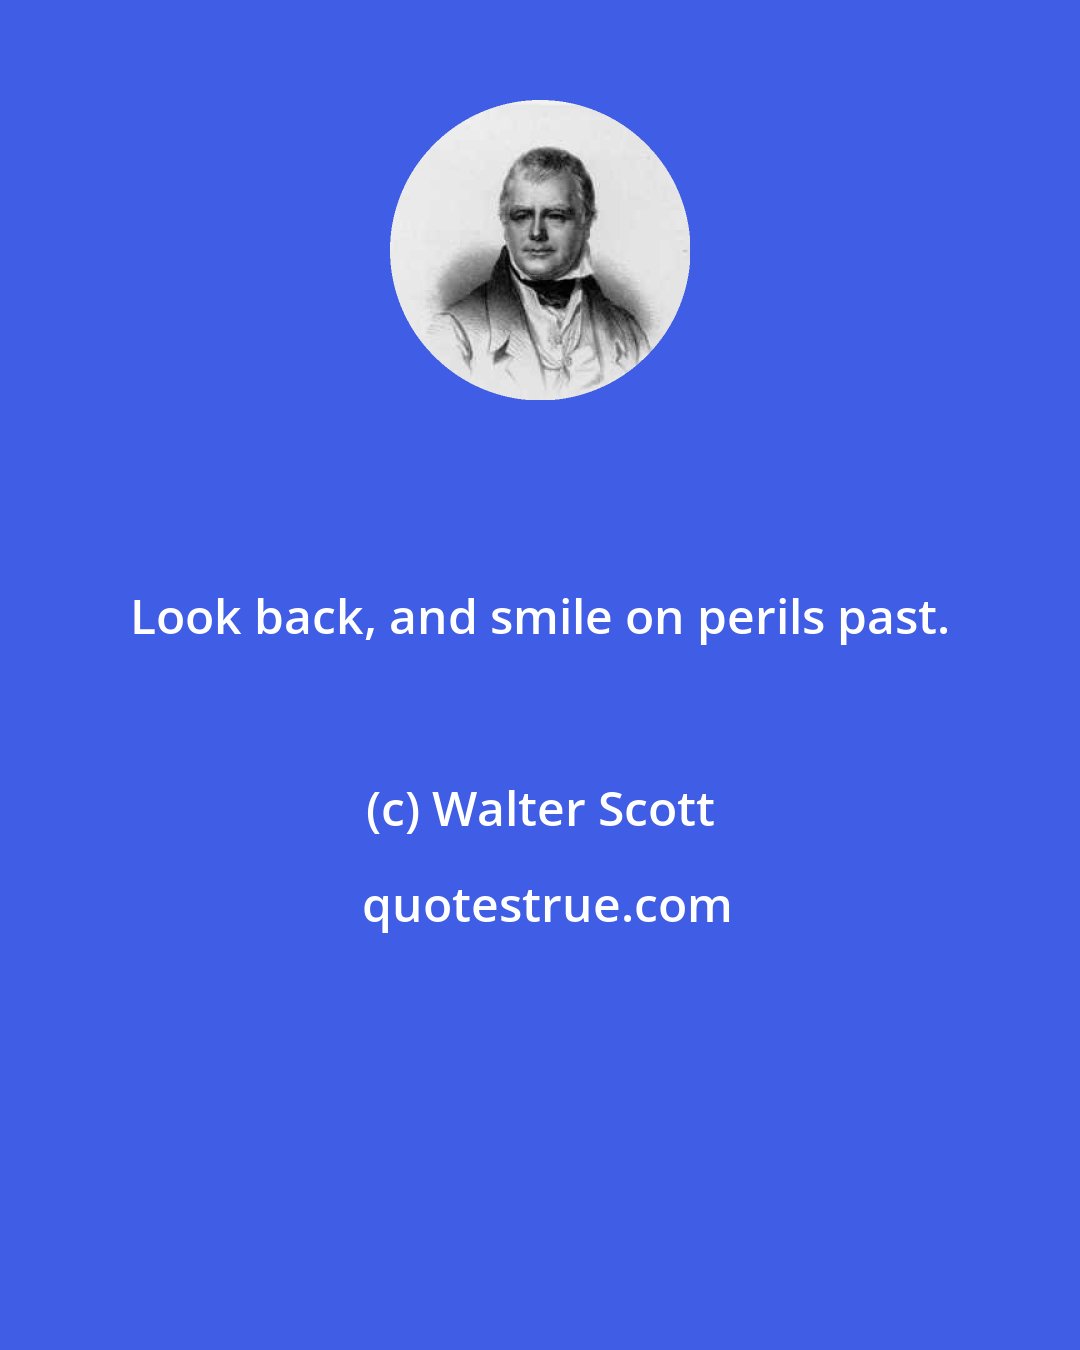 Walter Scott: Look back, and smile on perils past.